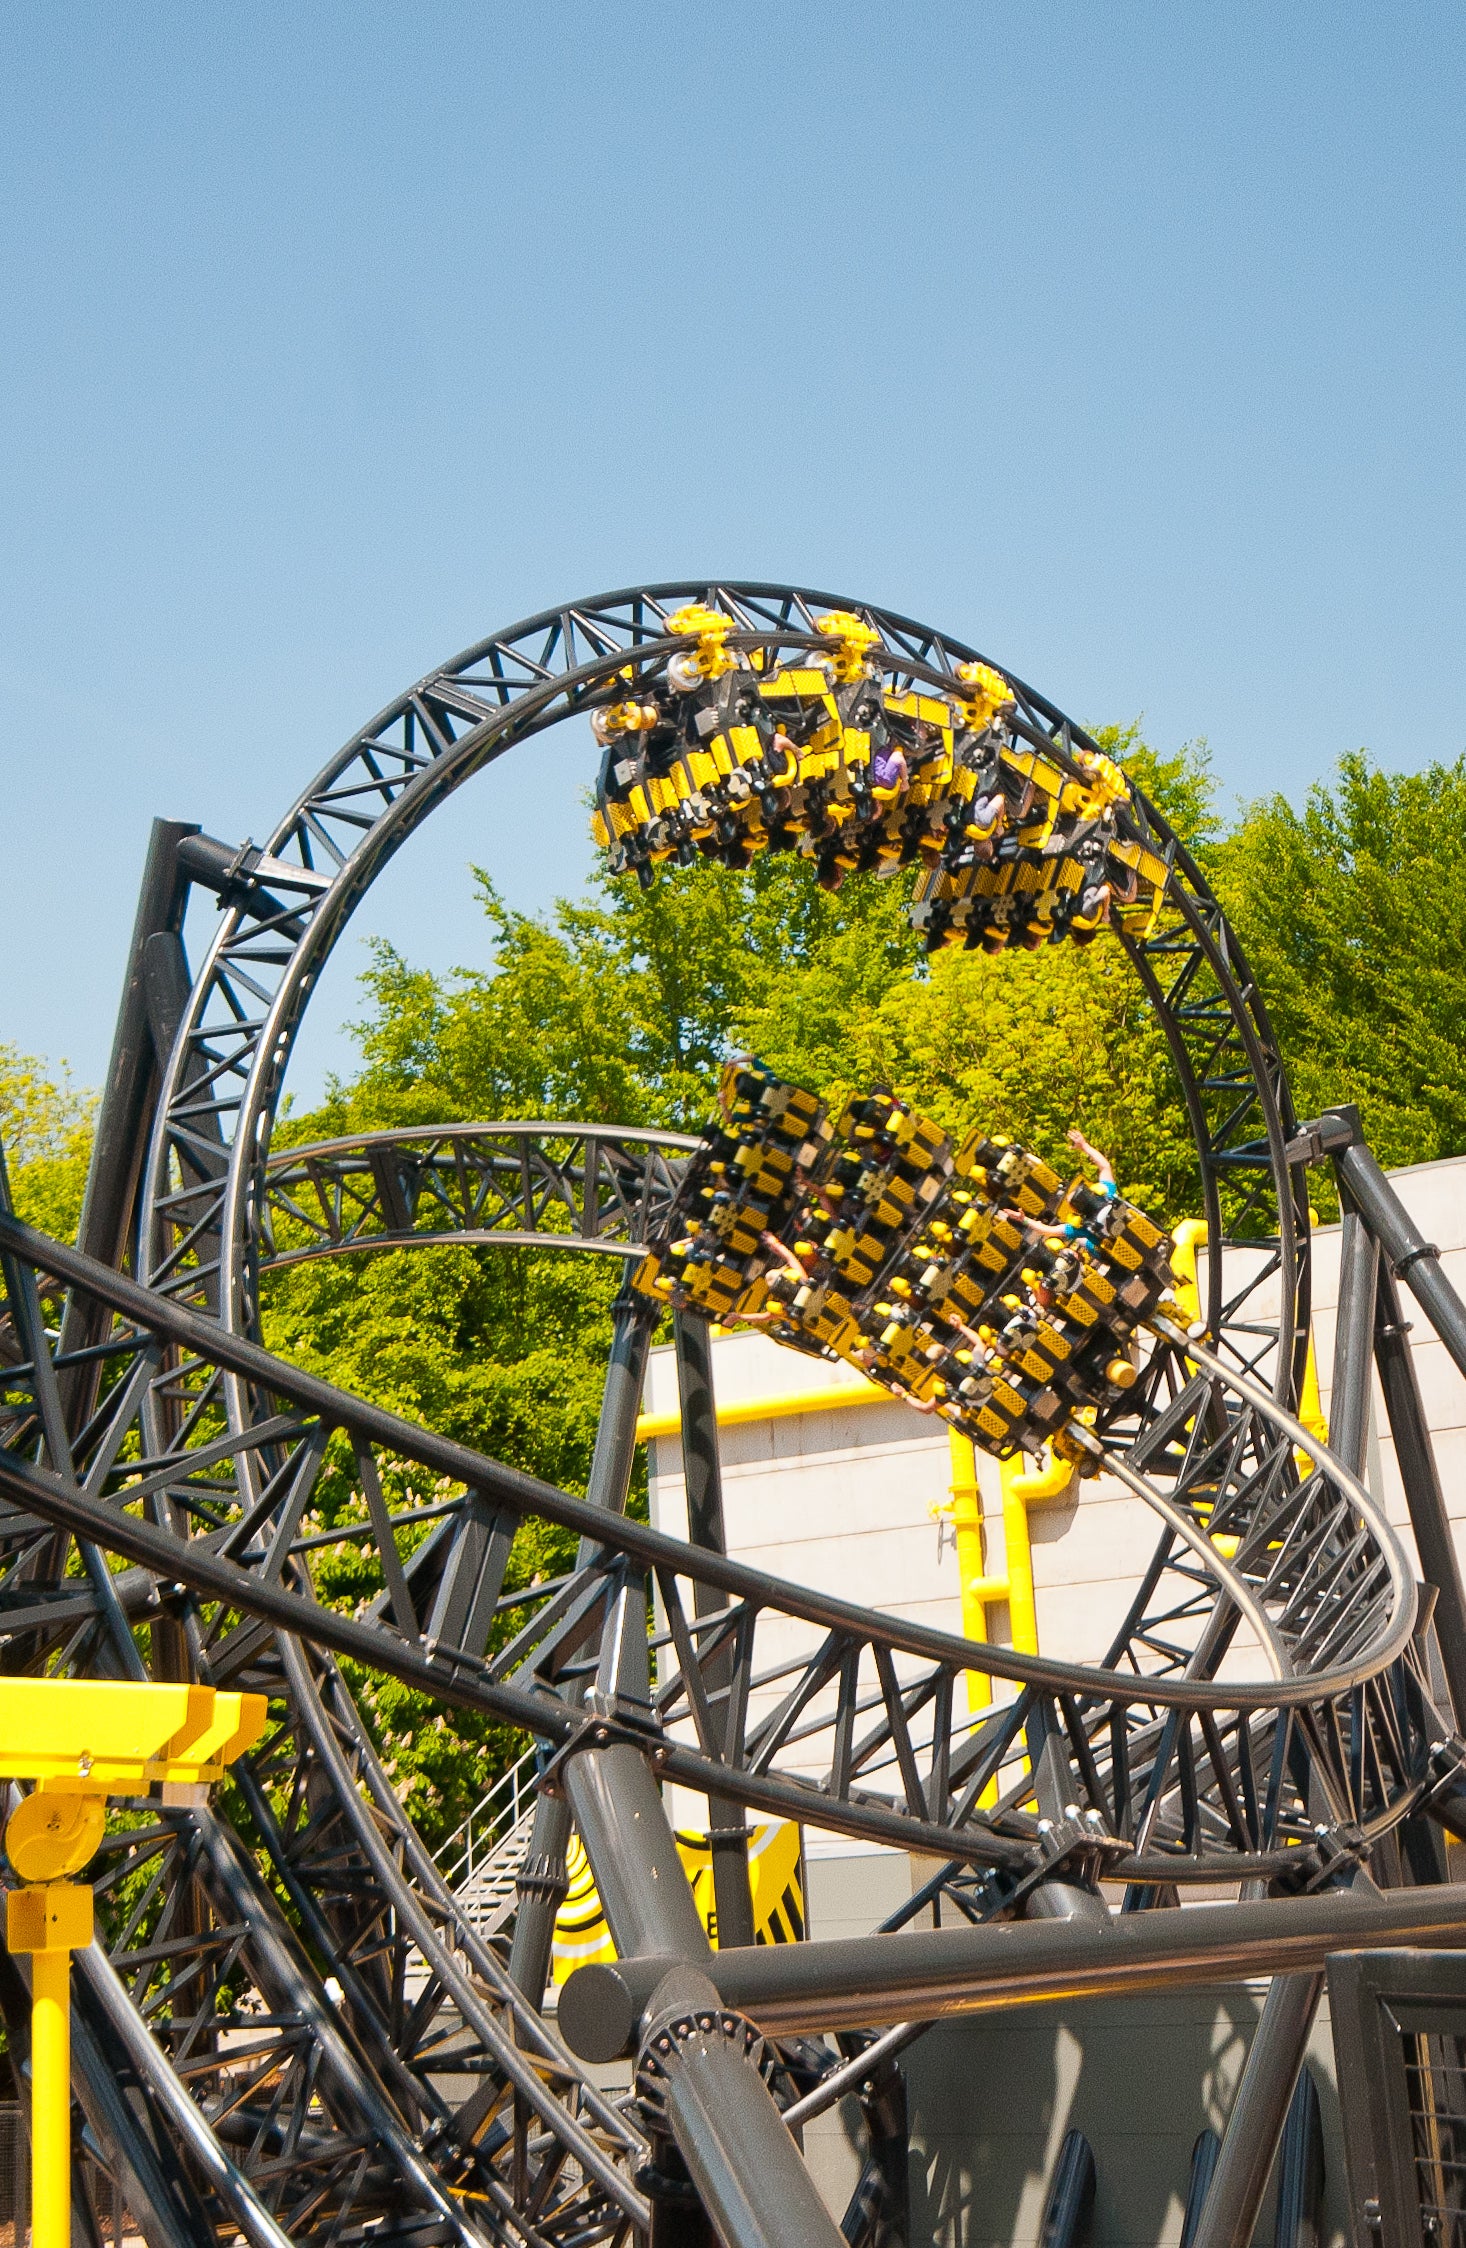 The upcoming attraction will join popular Alton Towers Resort rides including The Smiler